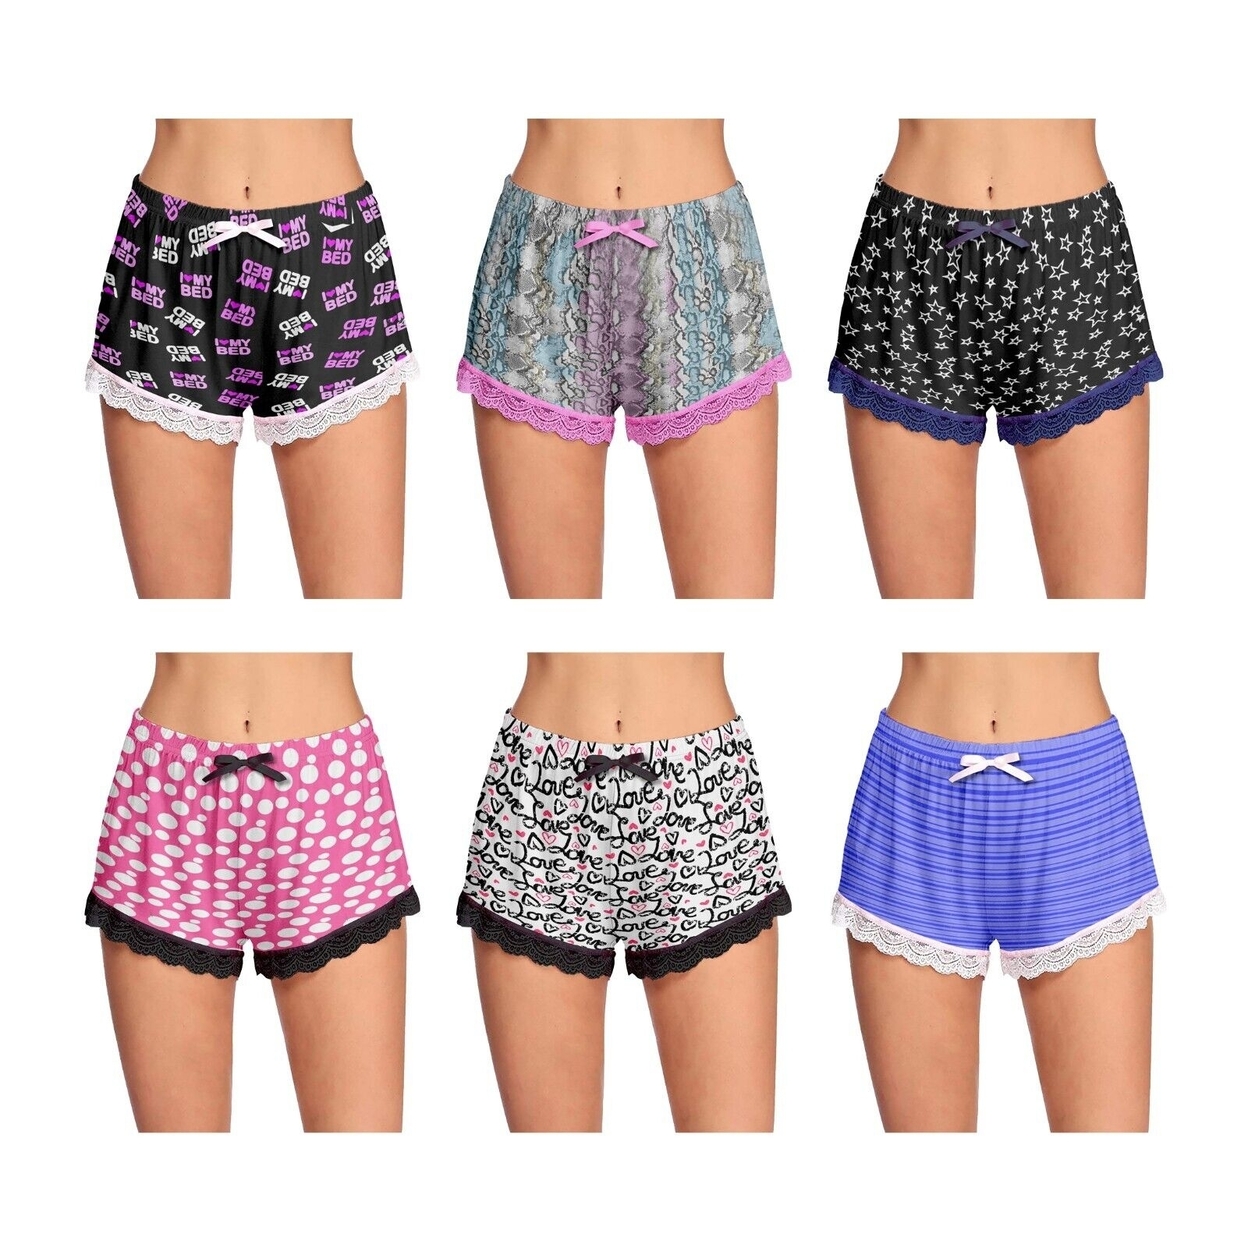 2-Pack: Women's Ultra-Soft Cozy Fun Printed Lace Trim Pajama Lounge Shorts - Large, Shapes